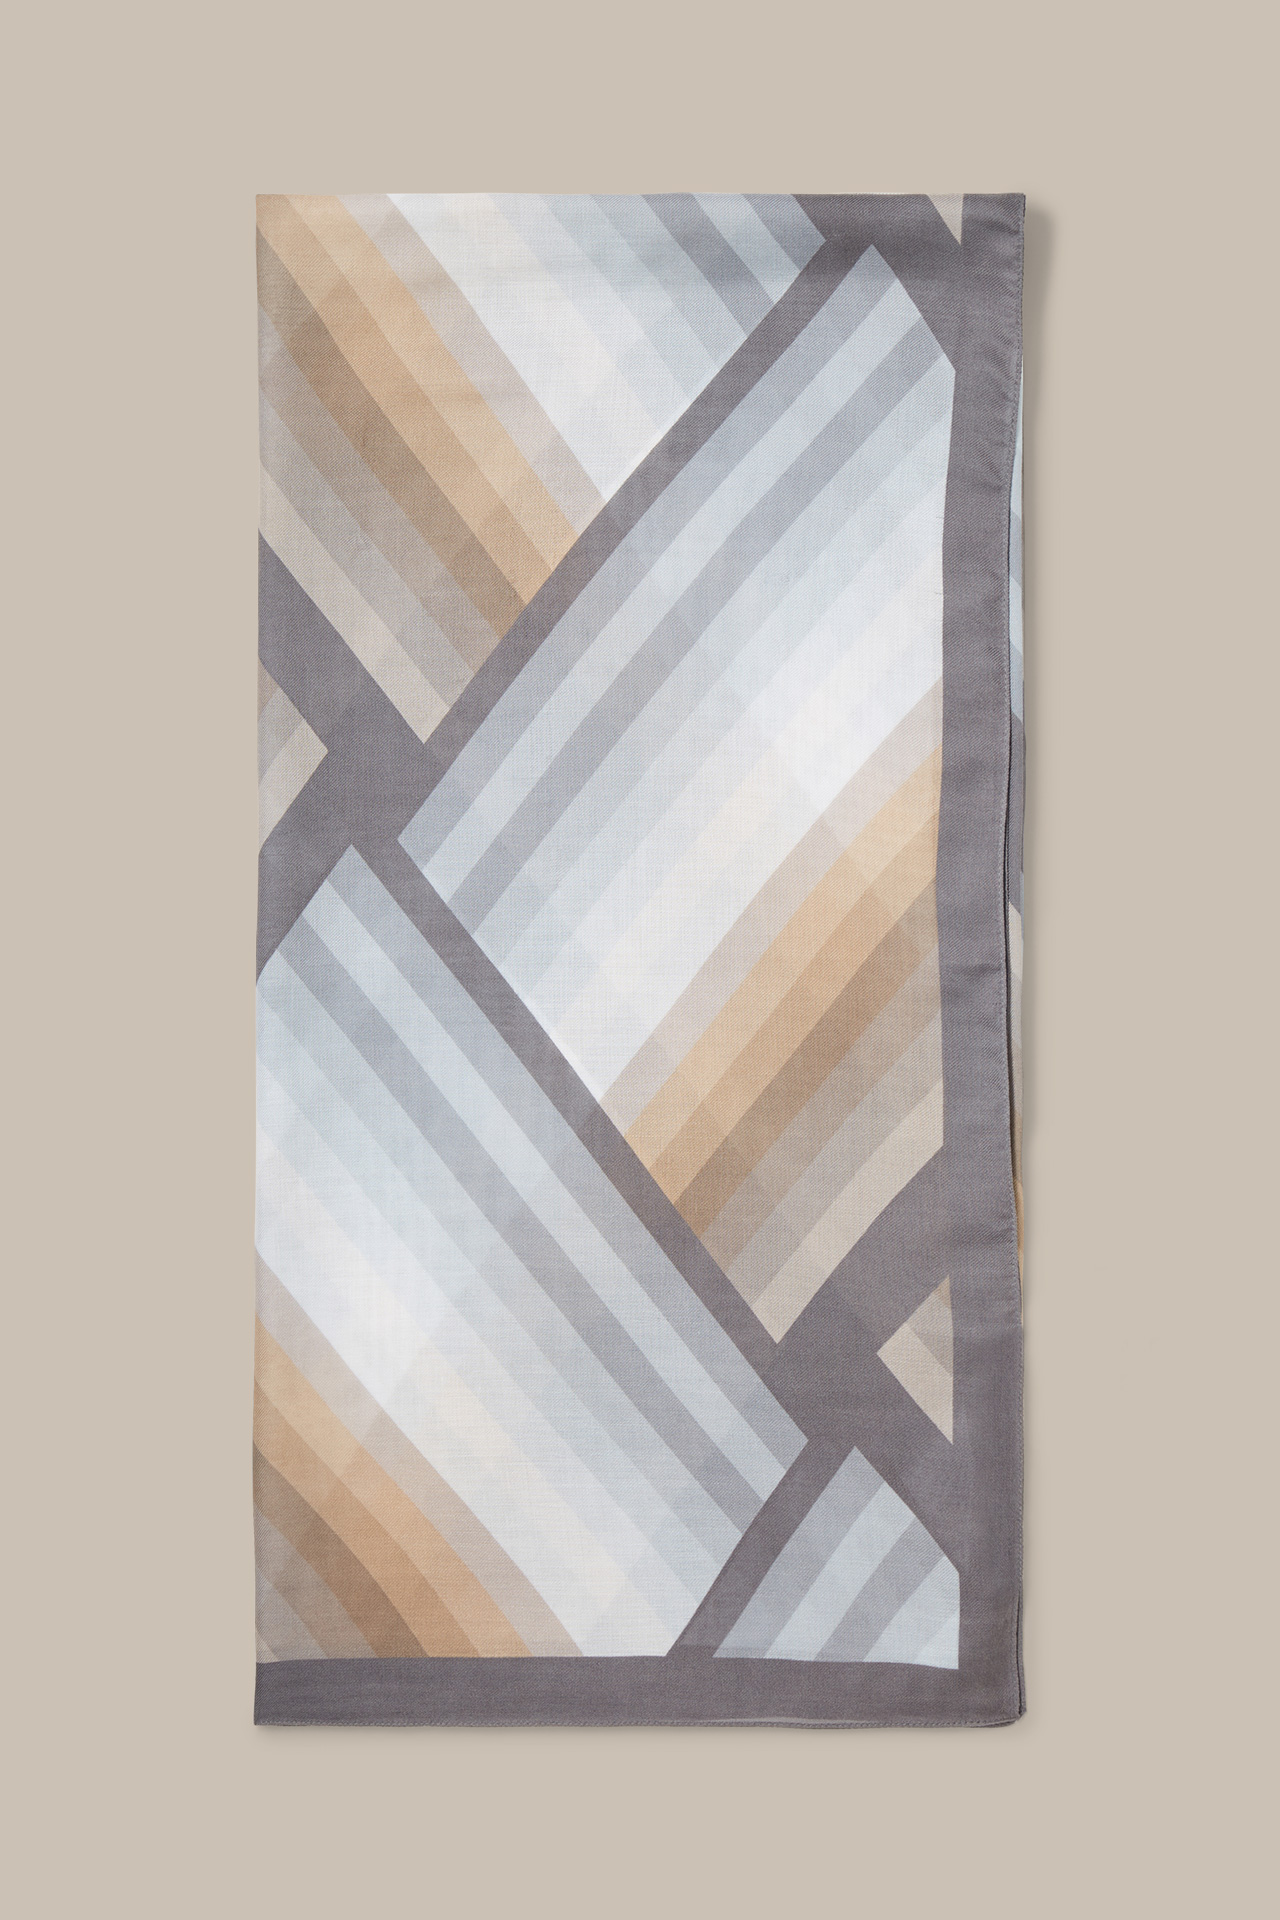 Modal patterned Scarf in a Grey and Beige,